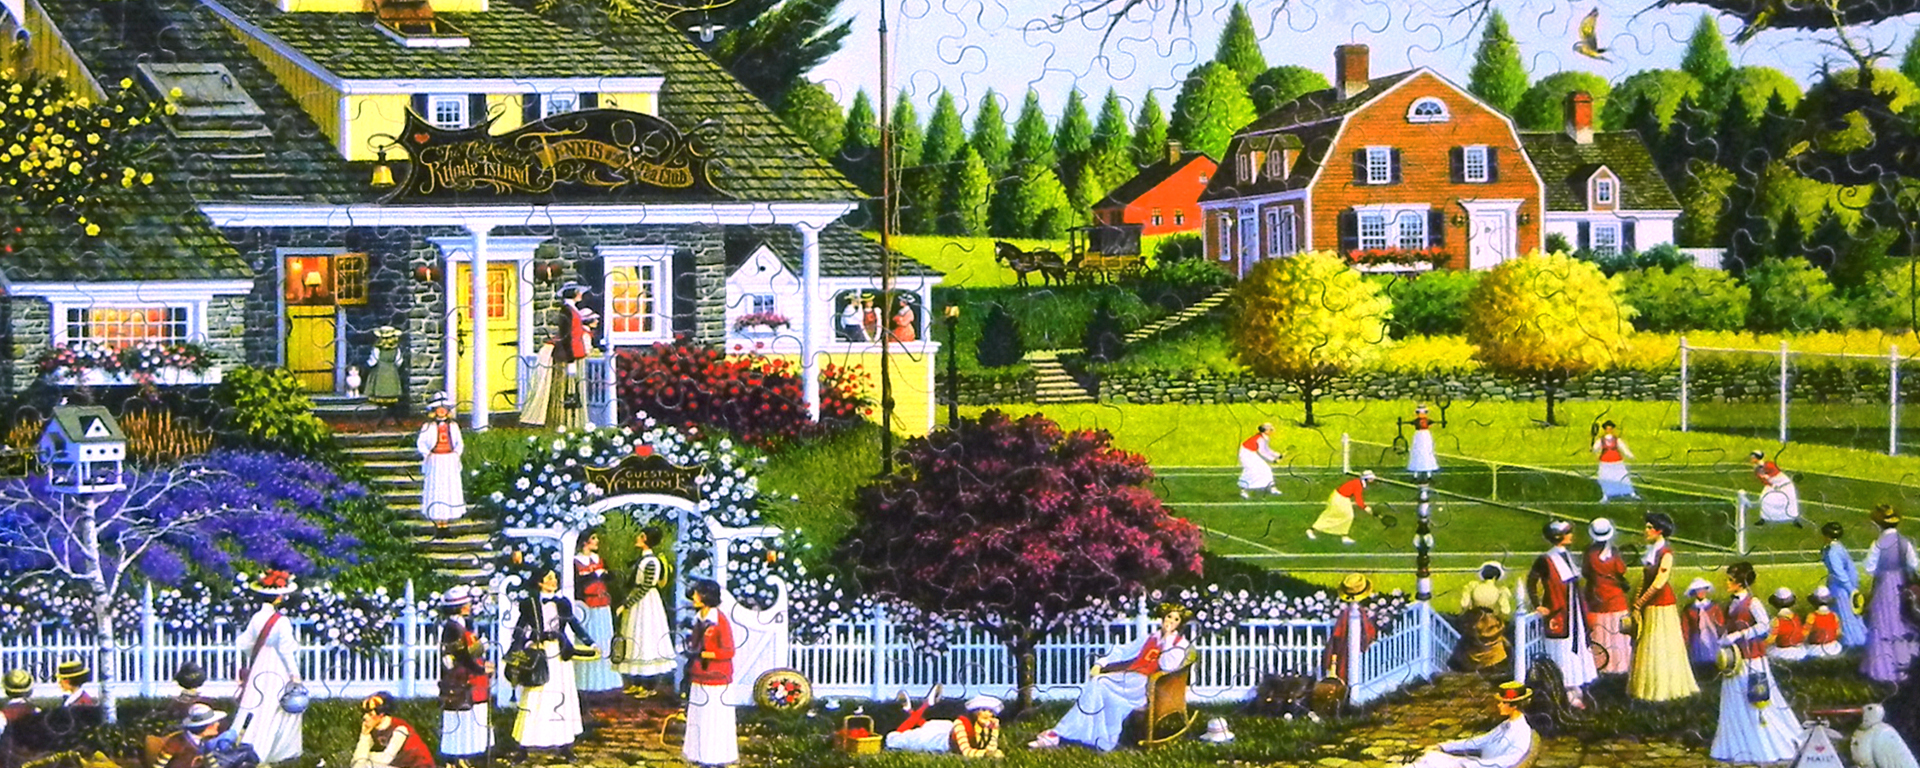 Wooden tennis puzzle of a Charles Wysocki painting featuring the Rhode Island Tennis Club in the past when women played in floor length dresses.